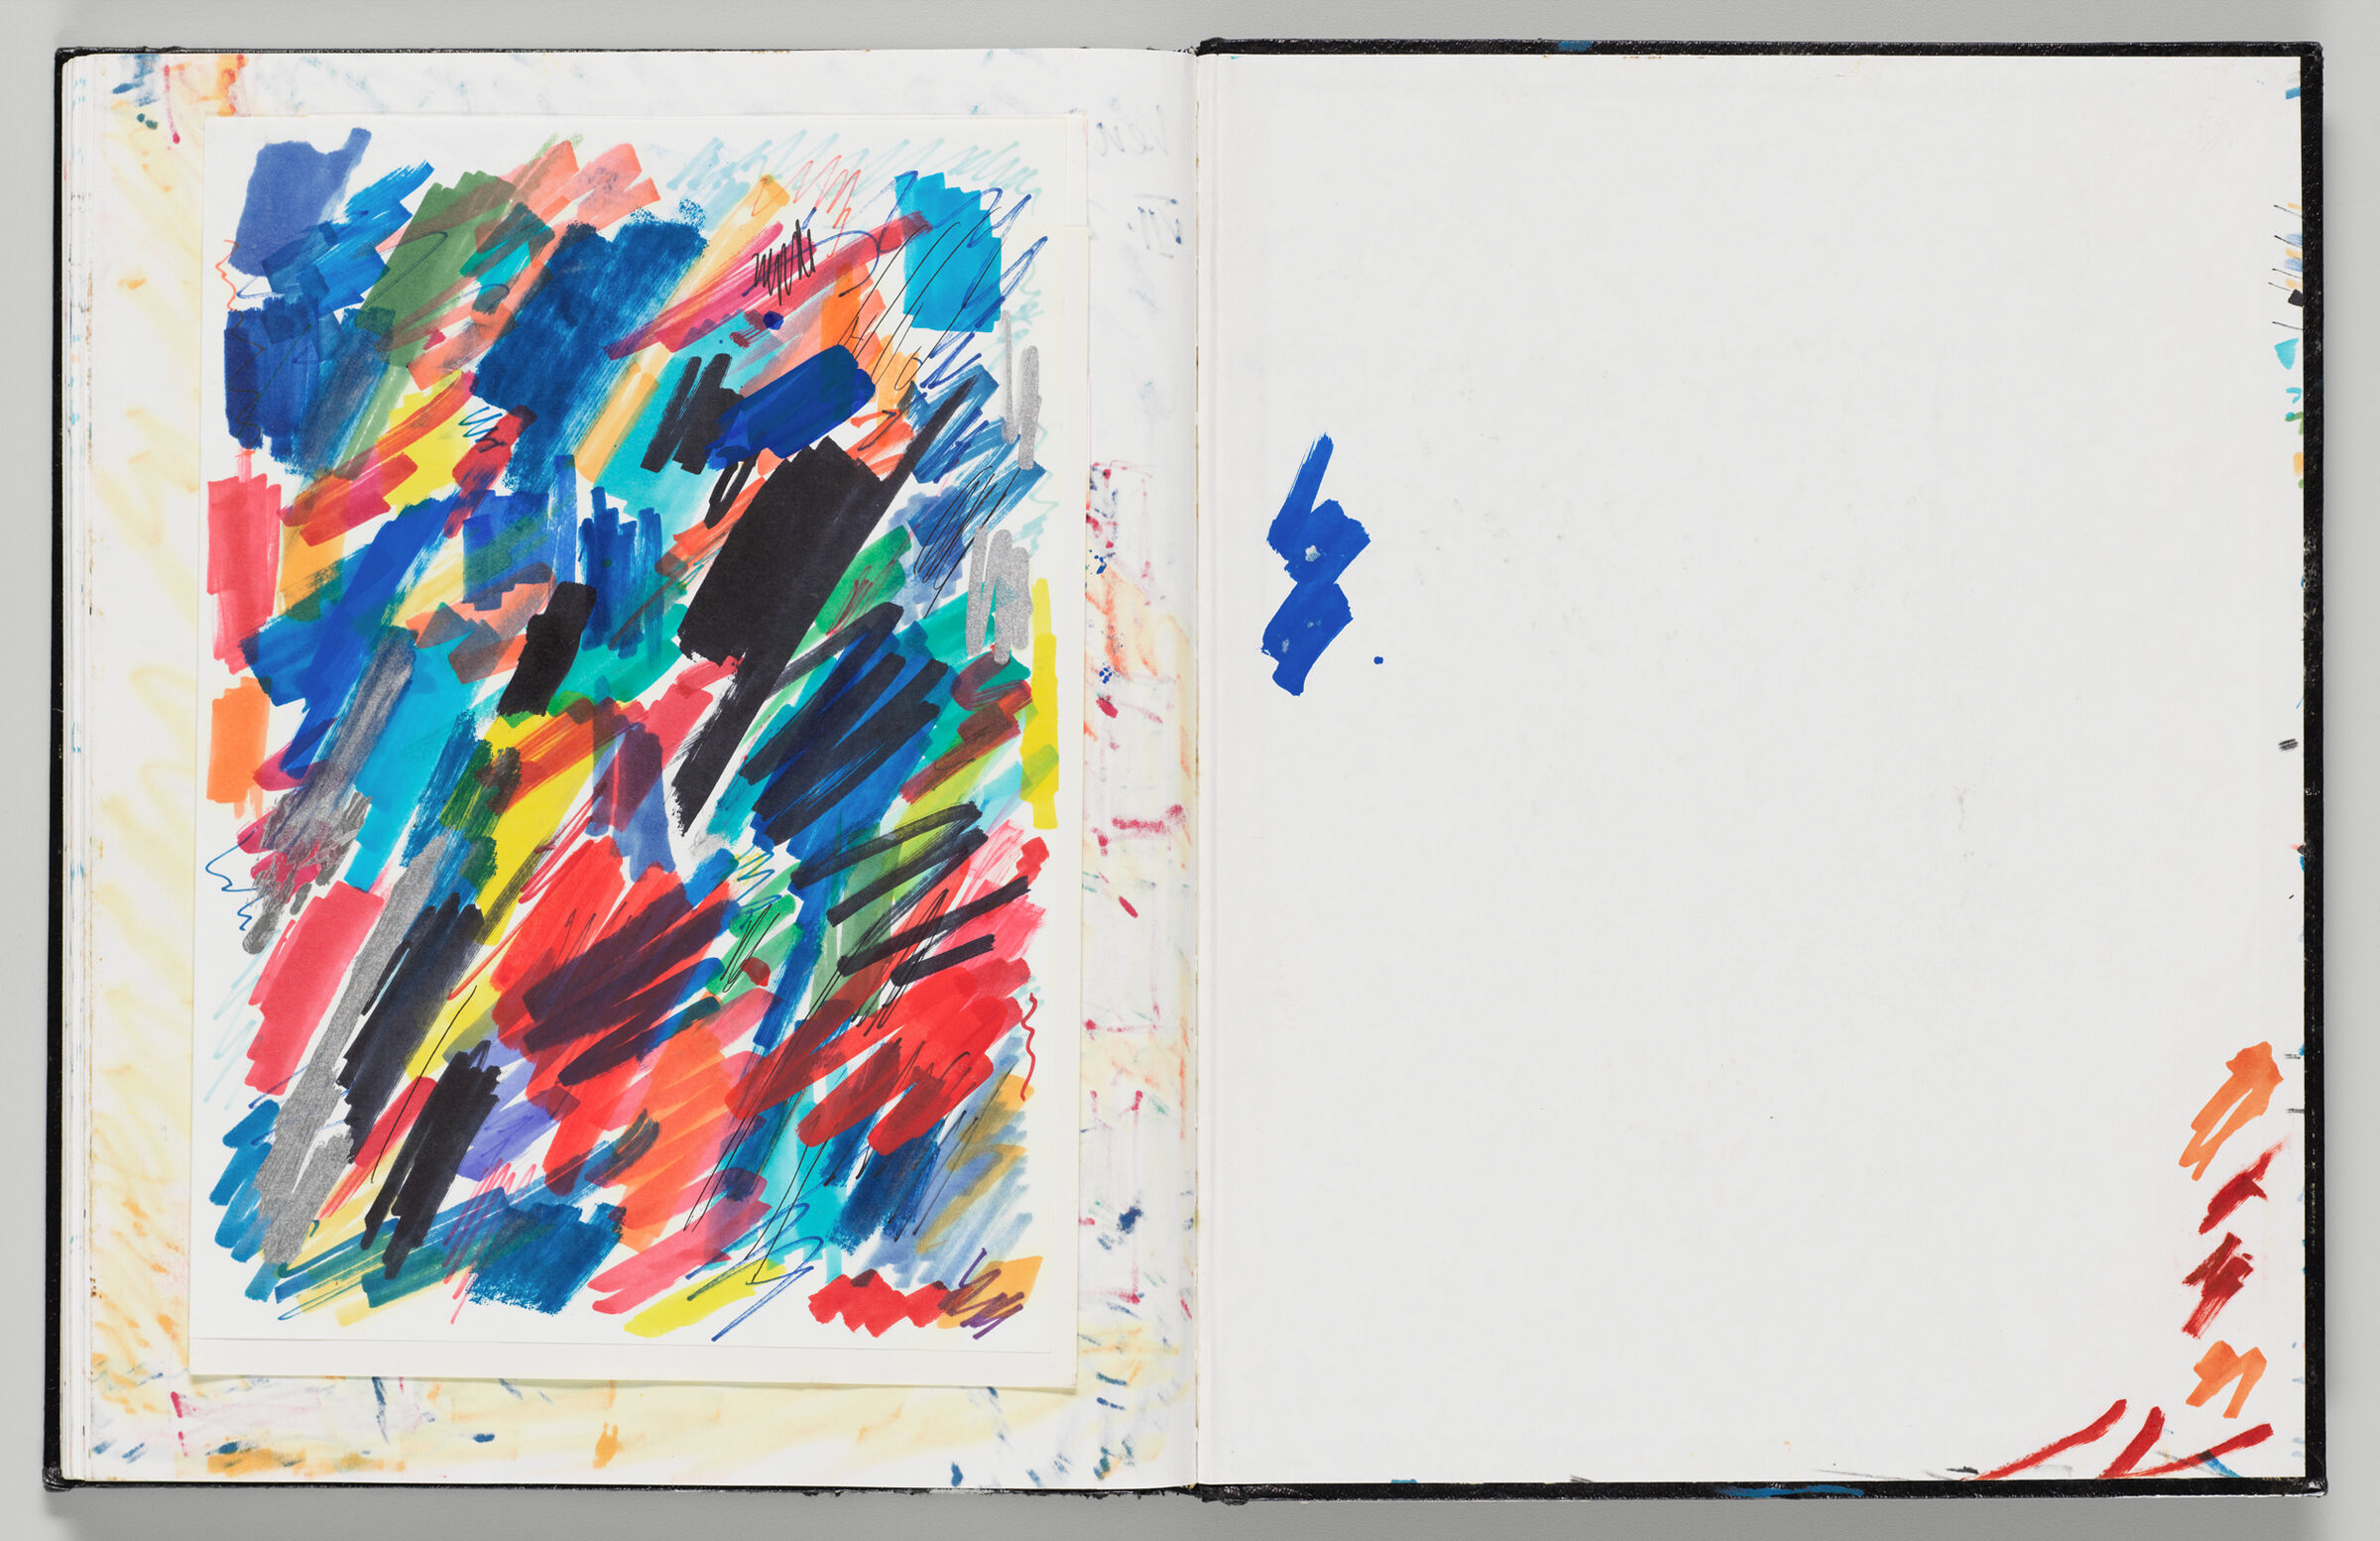 Untitled (Bleed-Through Of Previous Page And Color Transfer, Left Page); Untitled (Back Endpaper With Stray Marks, Right Page)